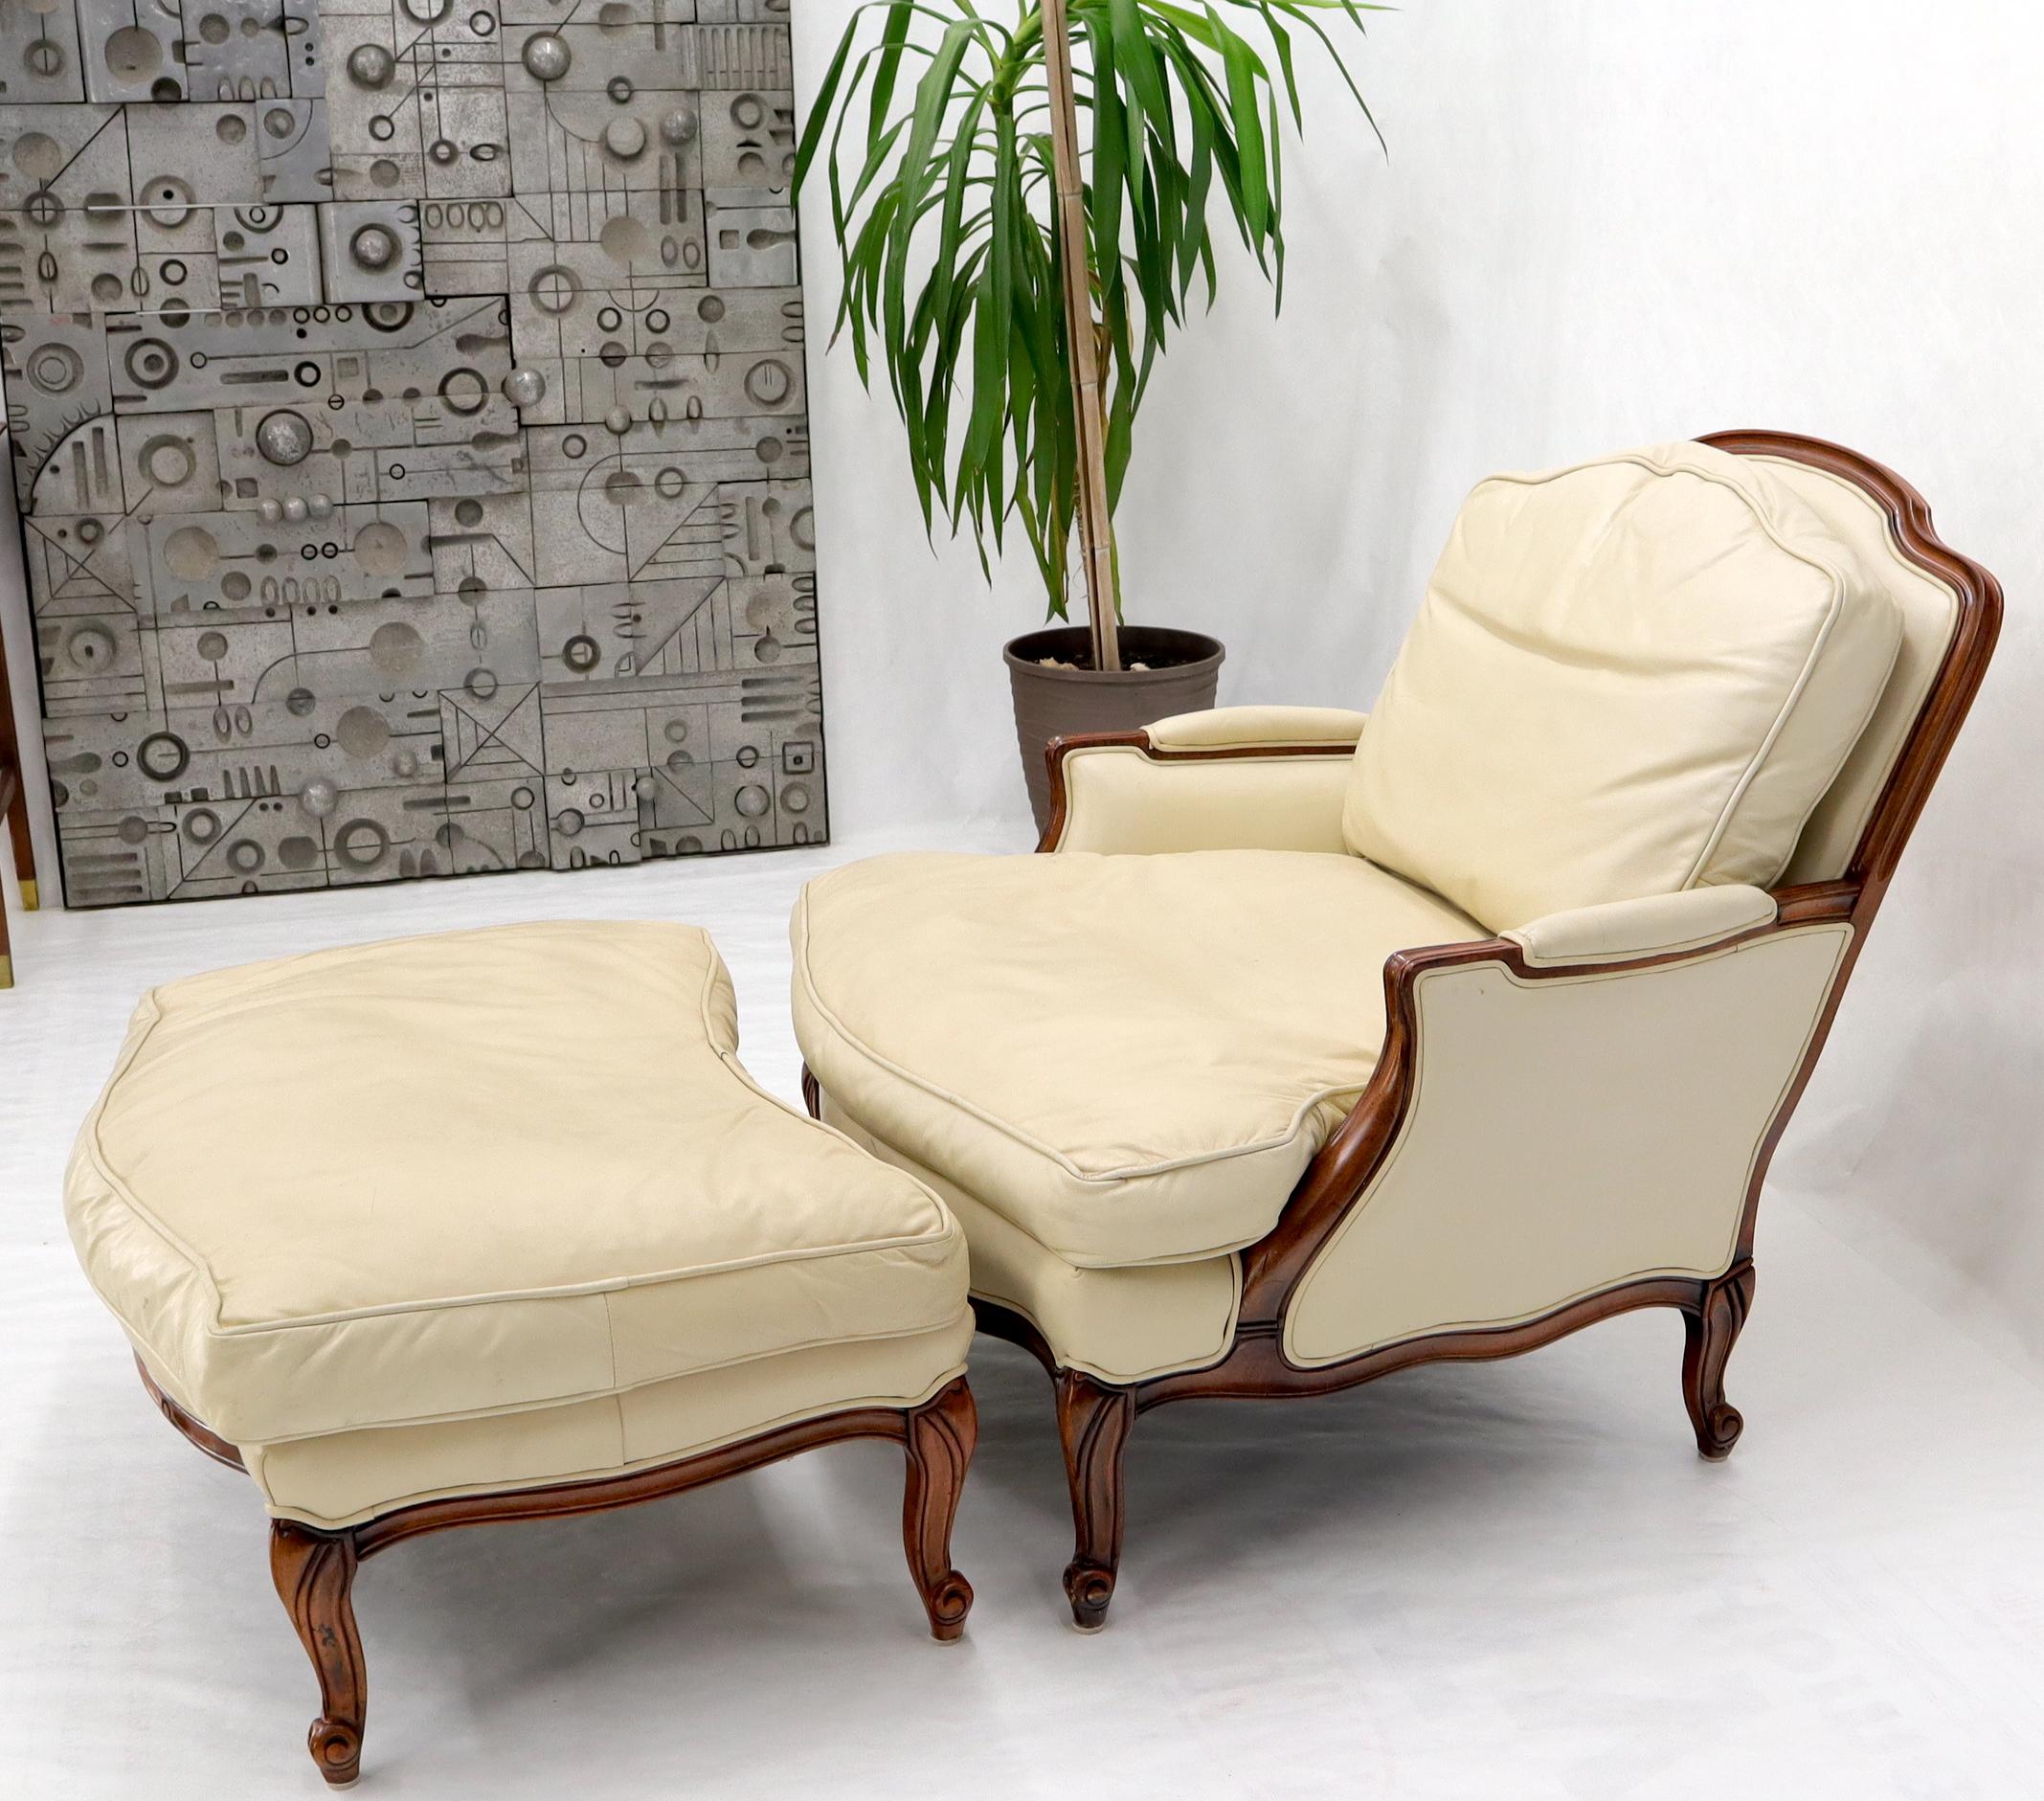 20th Century Cream Leather Chaise 2-Part Chaise Lounge Chair and Ottoman